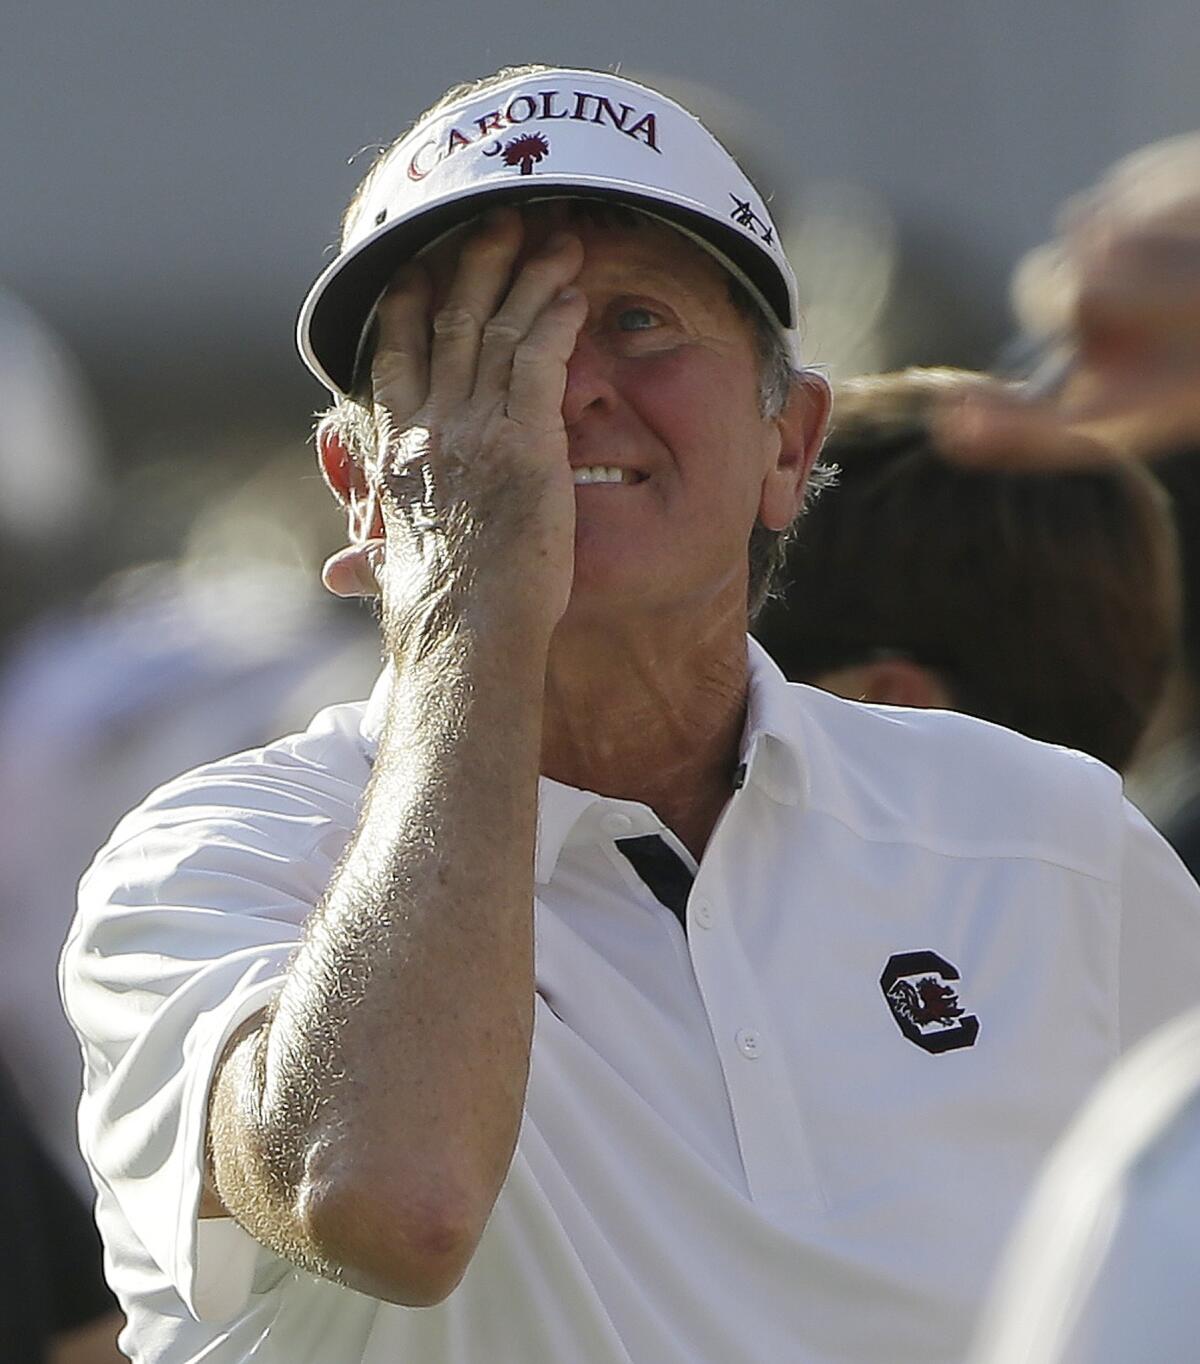 South Carolina Coach Steve Spurrier didn't have the best on-camera performance this week.